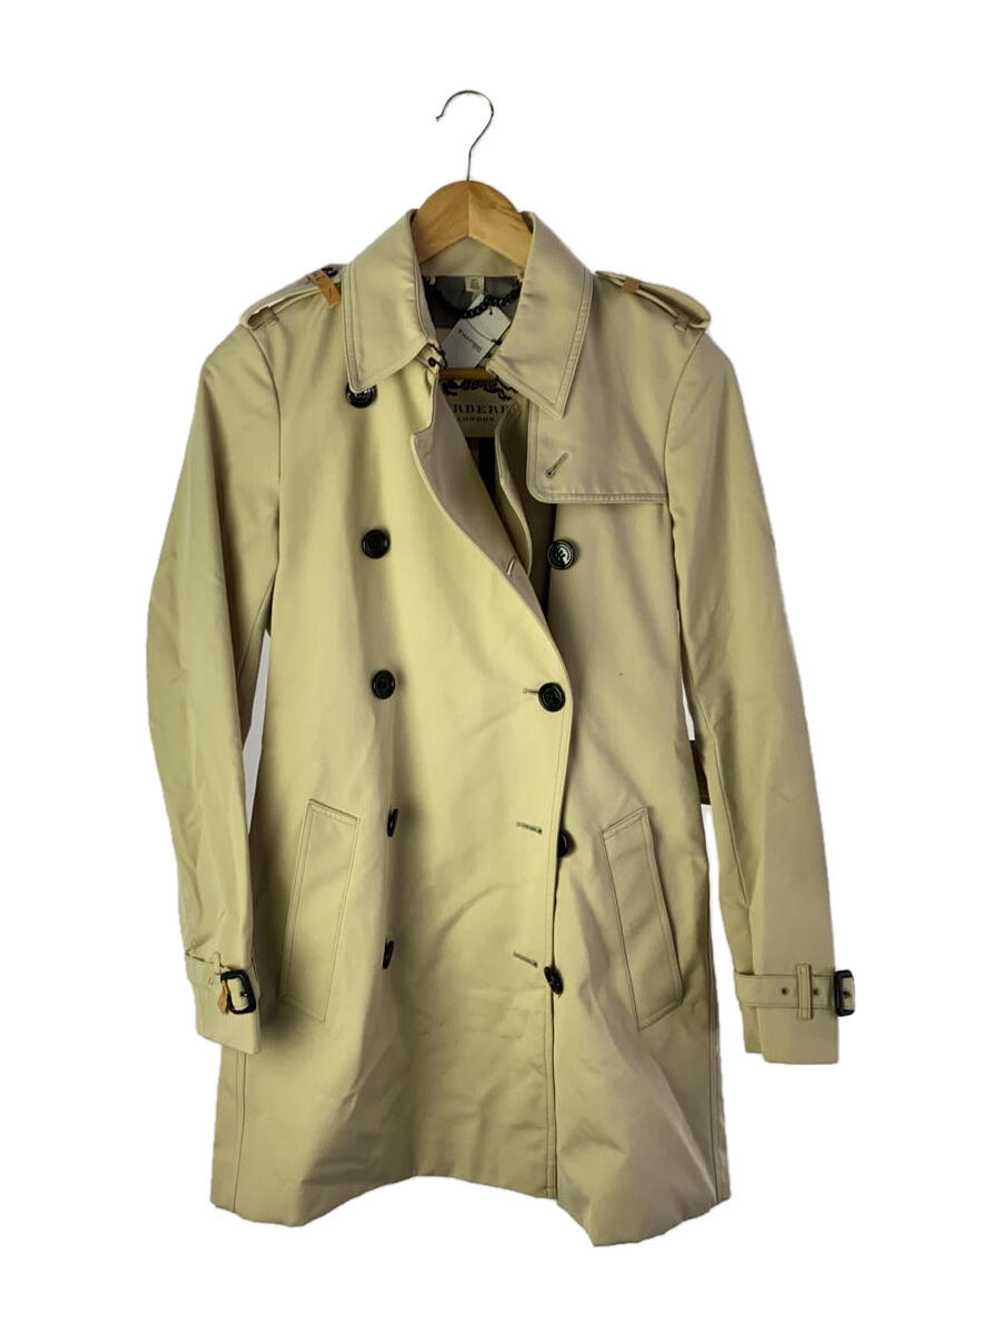 Burberry  London Short Trench Coat 36 Cotton  Wear - image 1